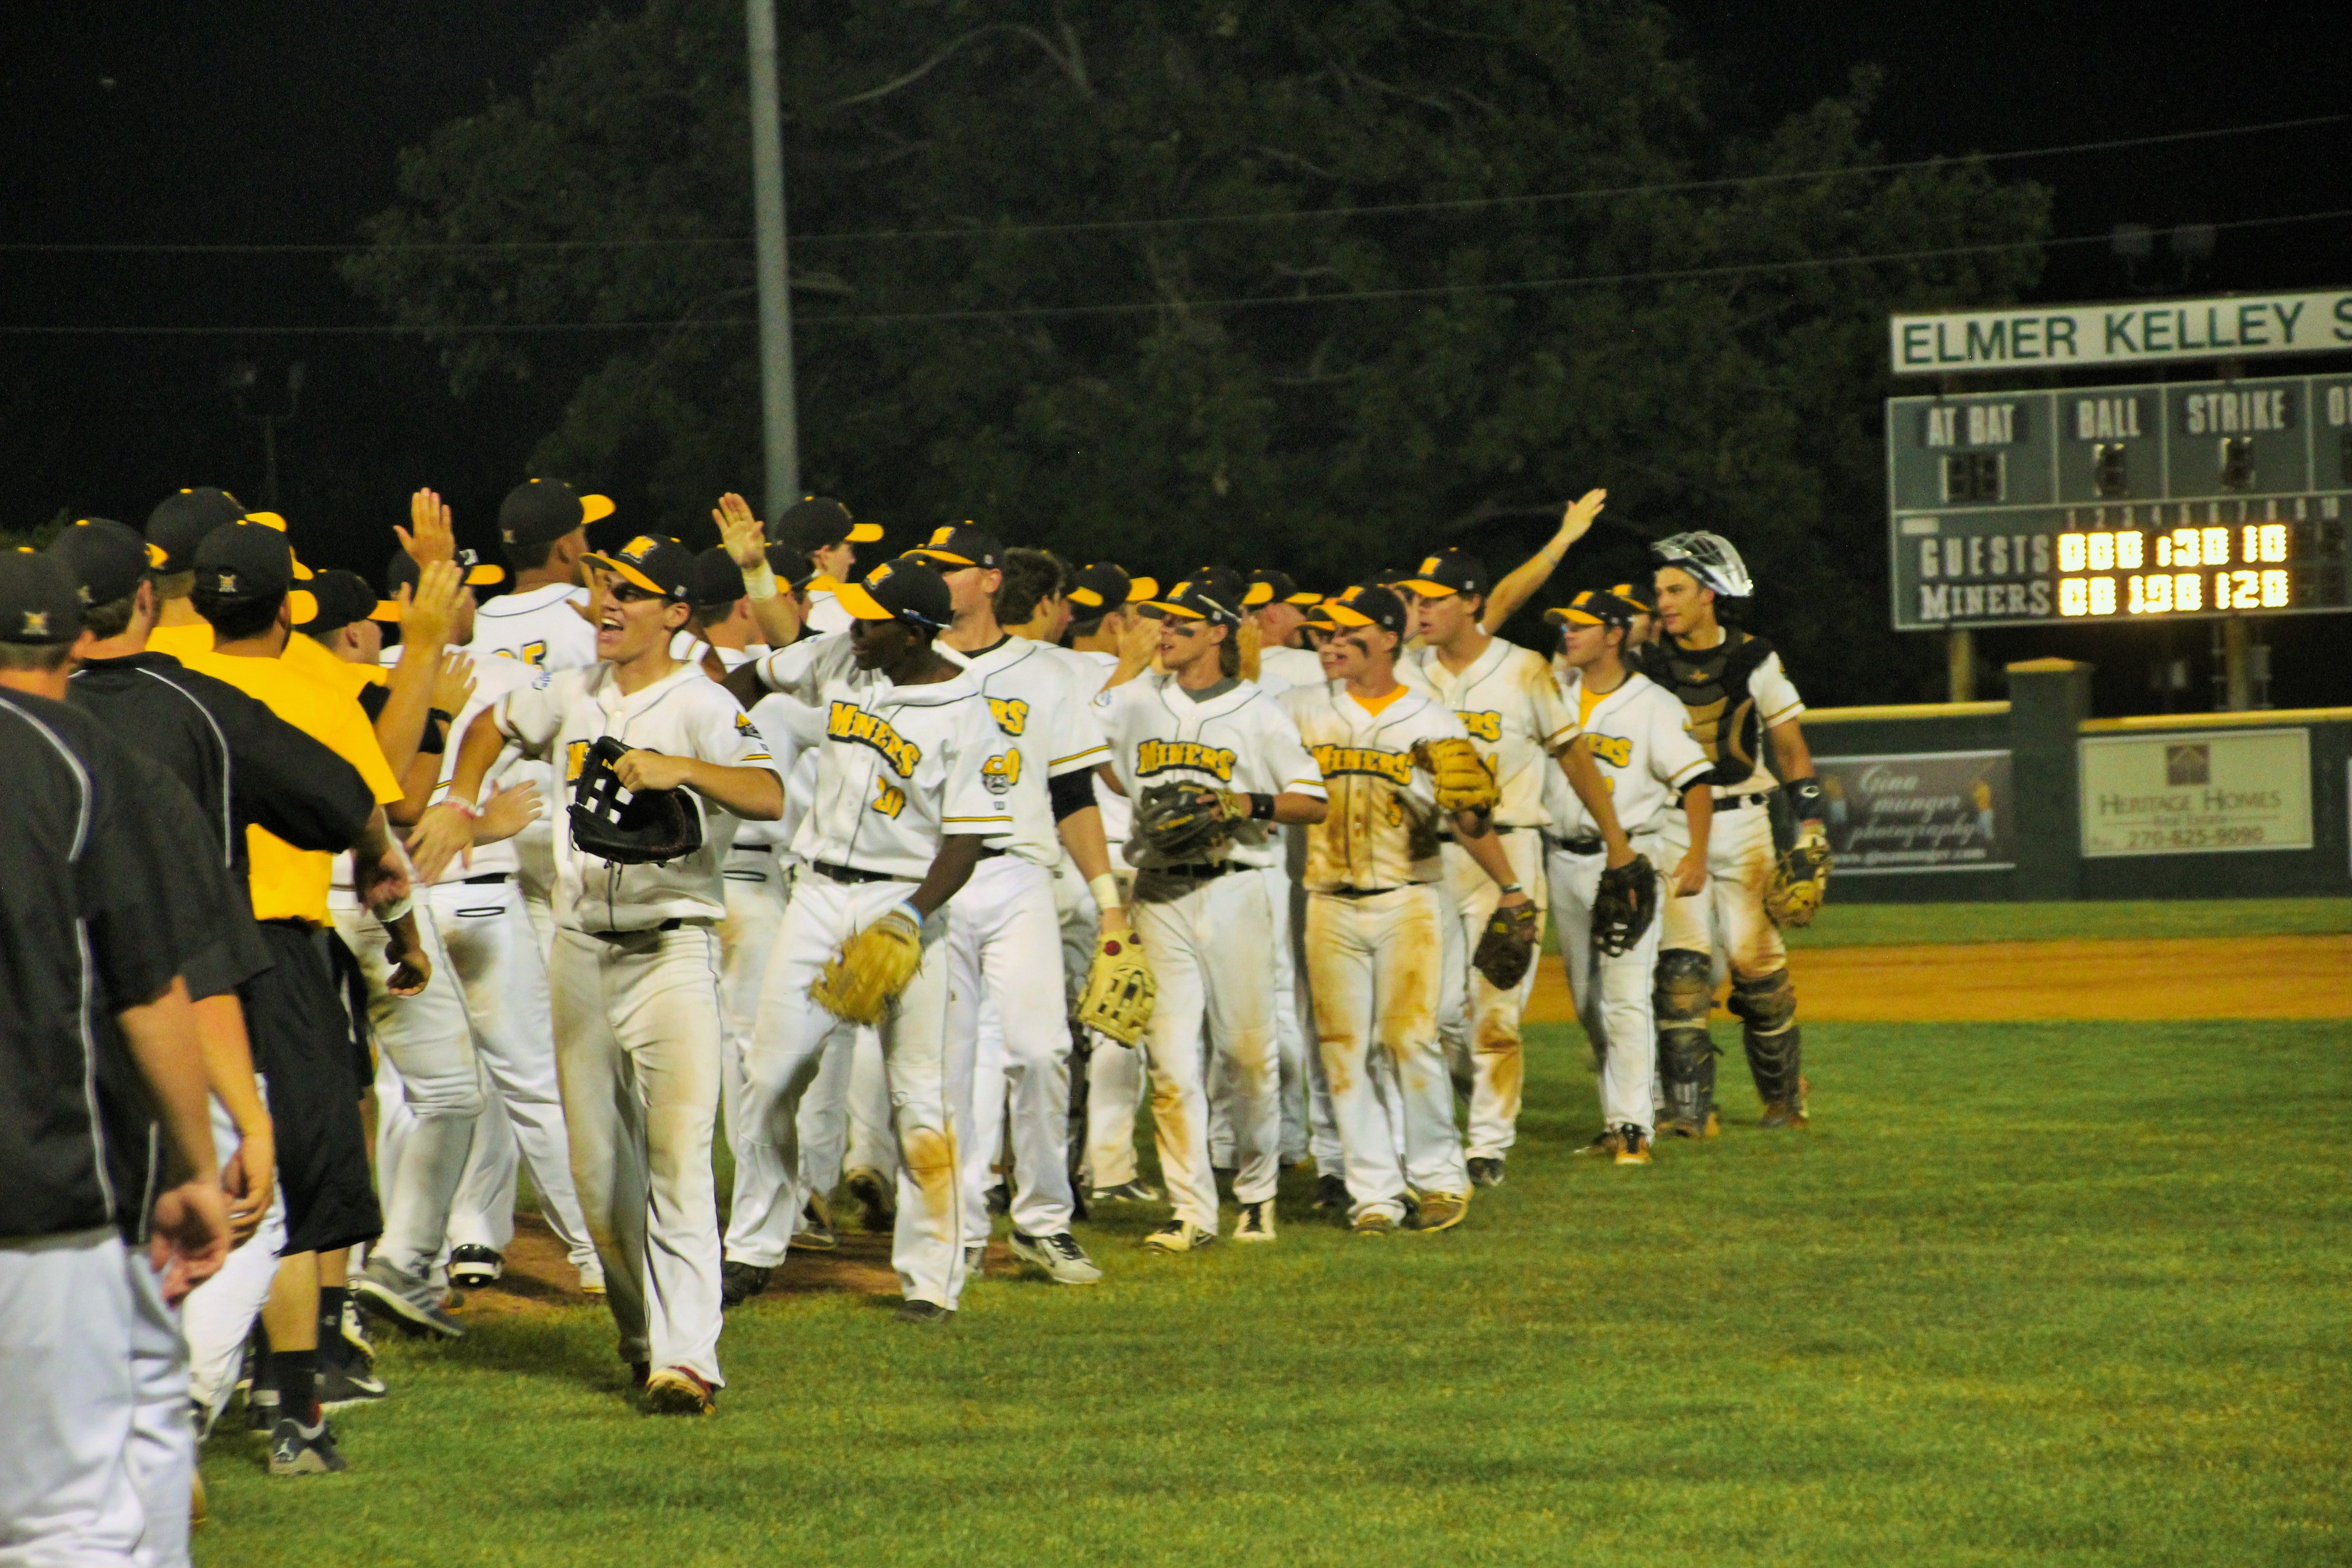 Madisonville Miners baseball team celebrating after game win